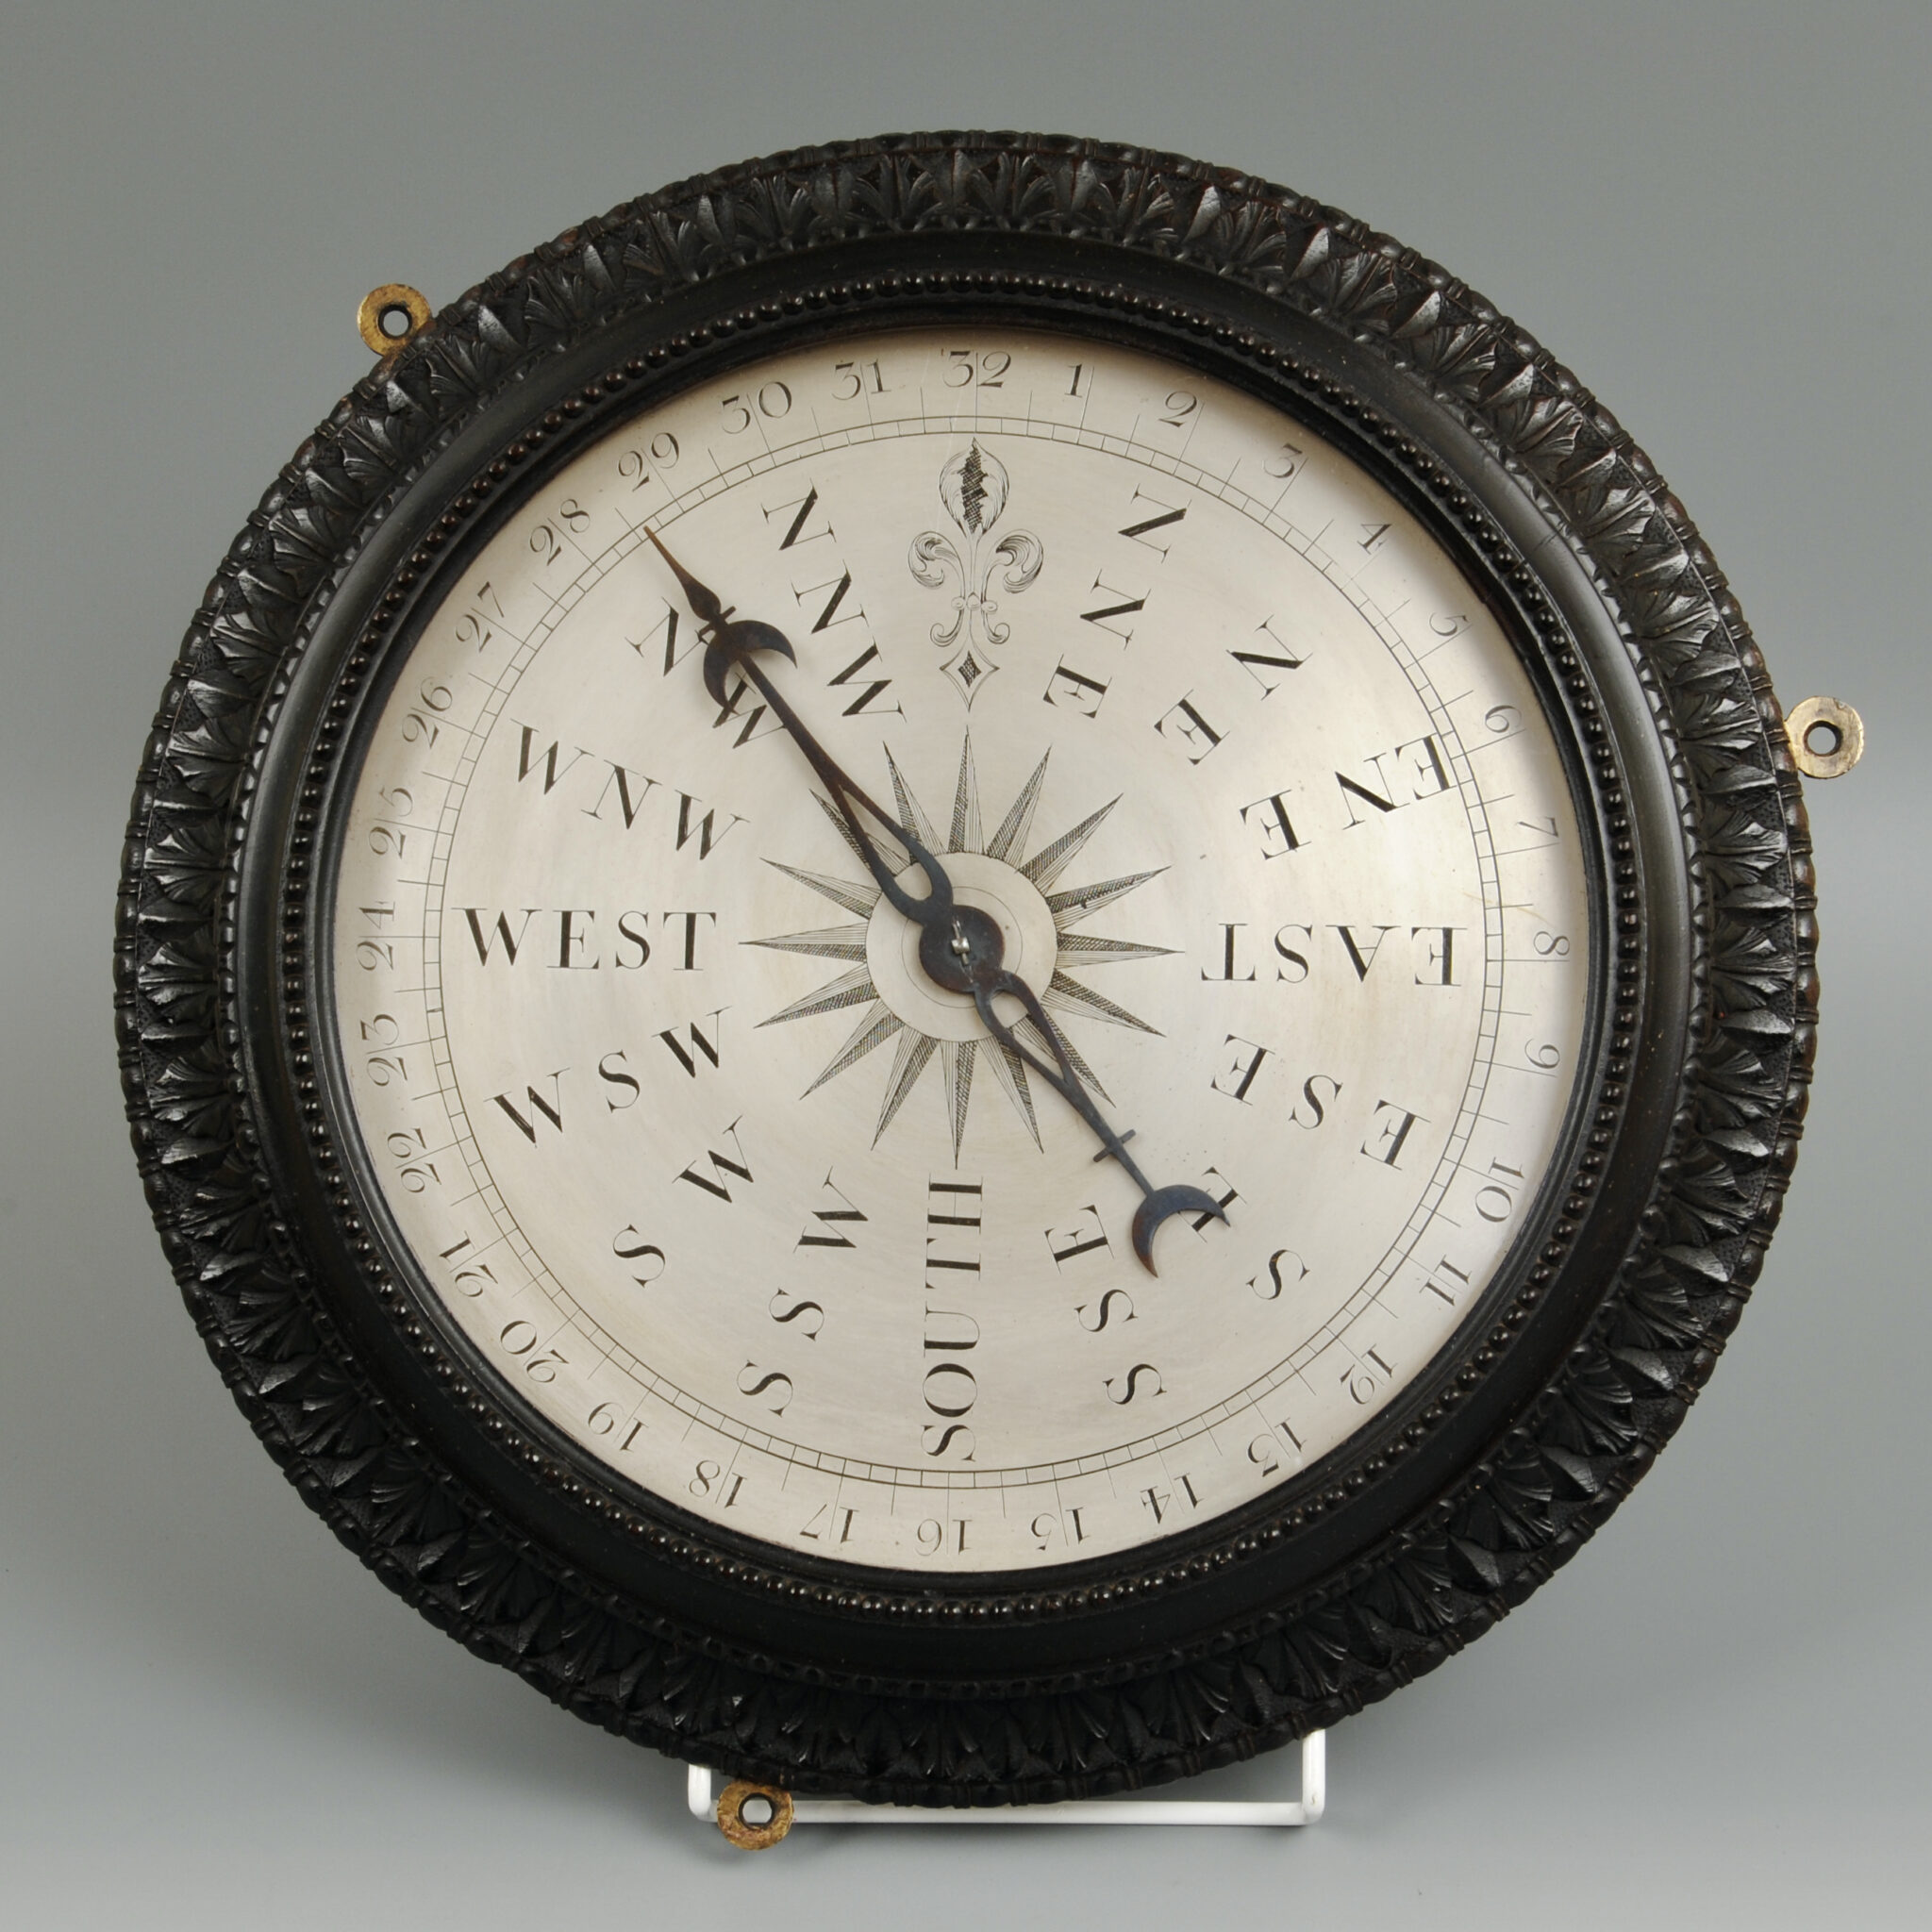 A rare wind vane dial in the manner of Whitehurst